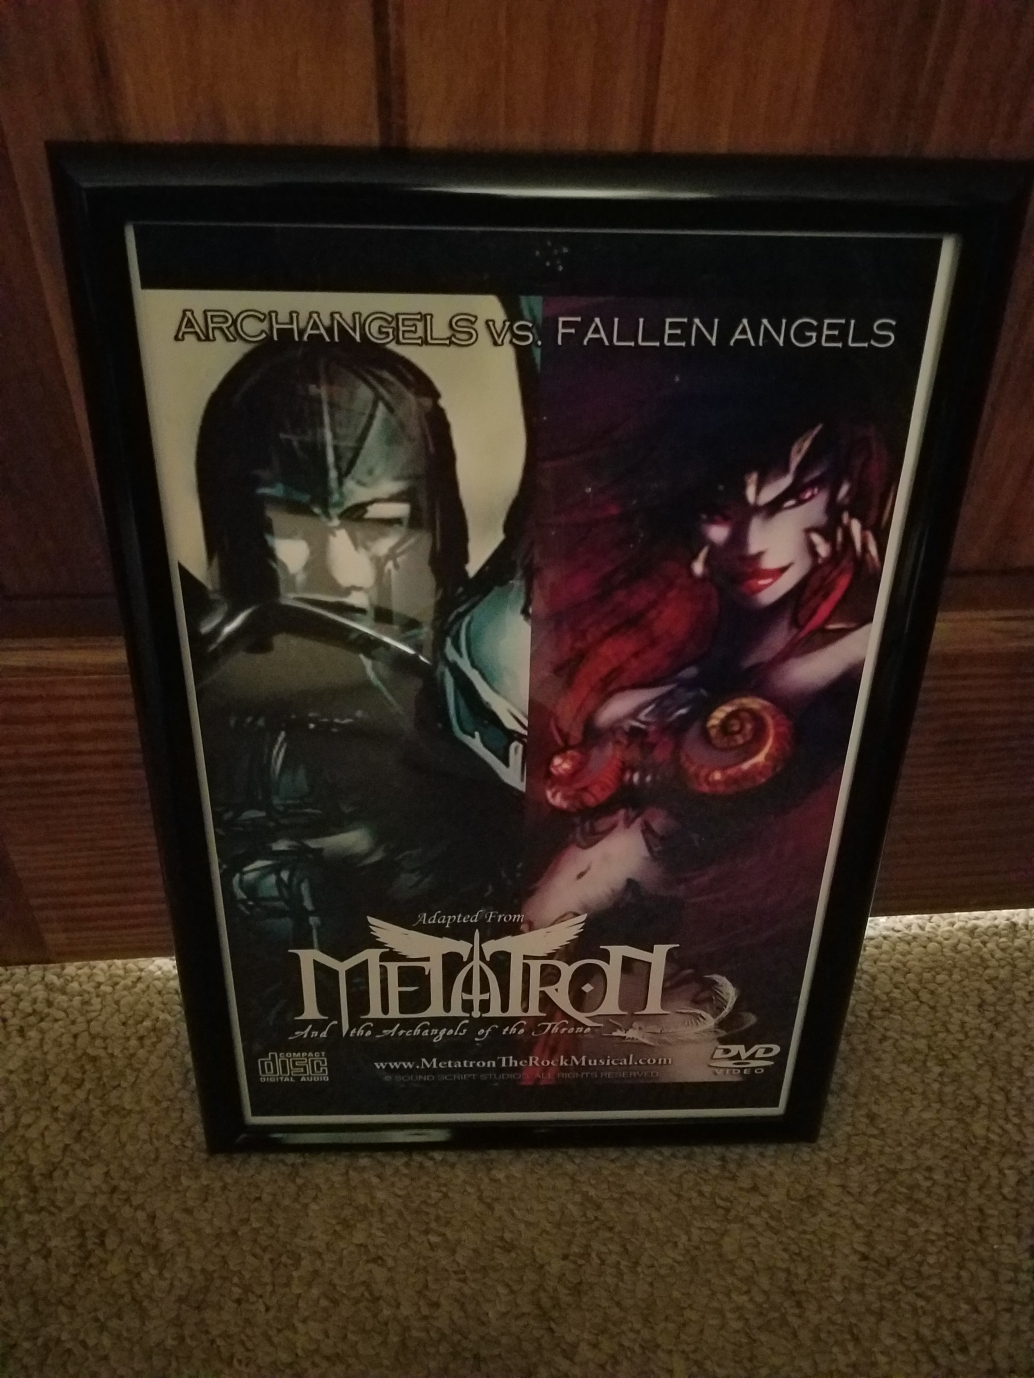 Metatron Poster with Lilith